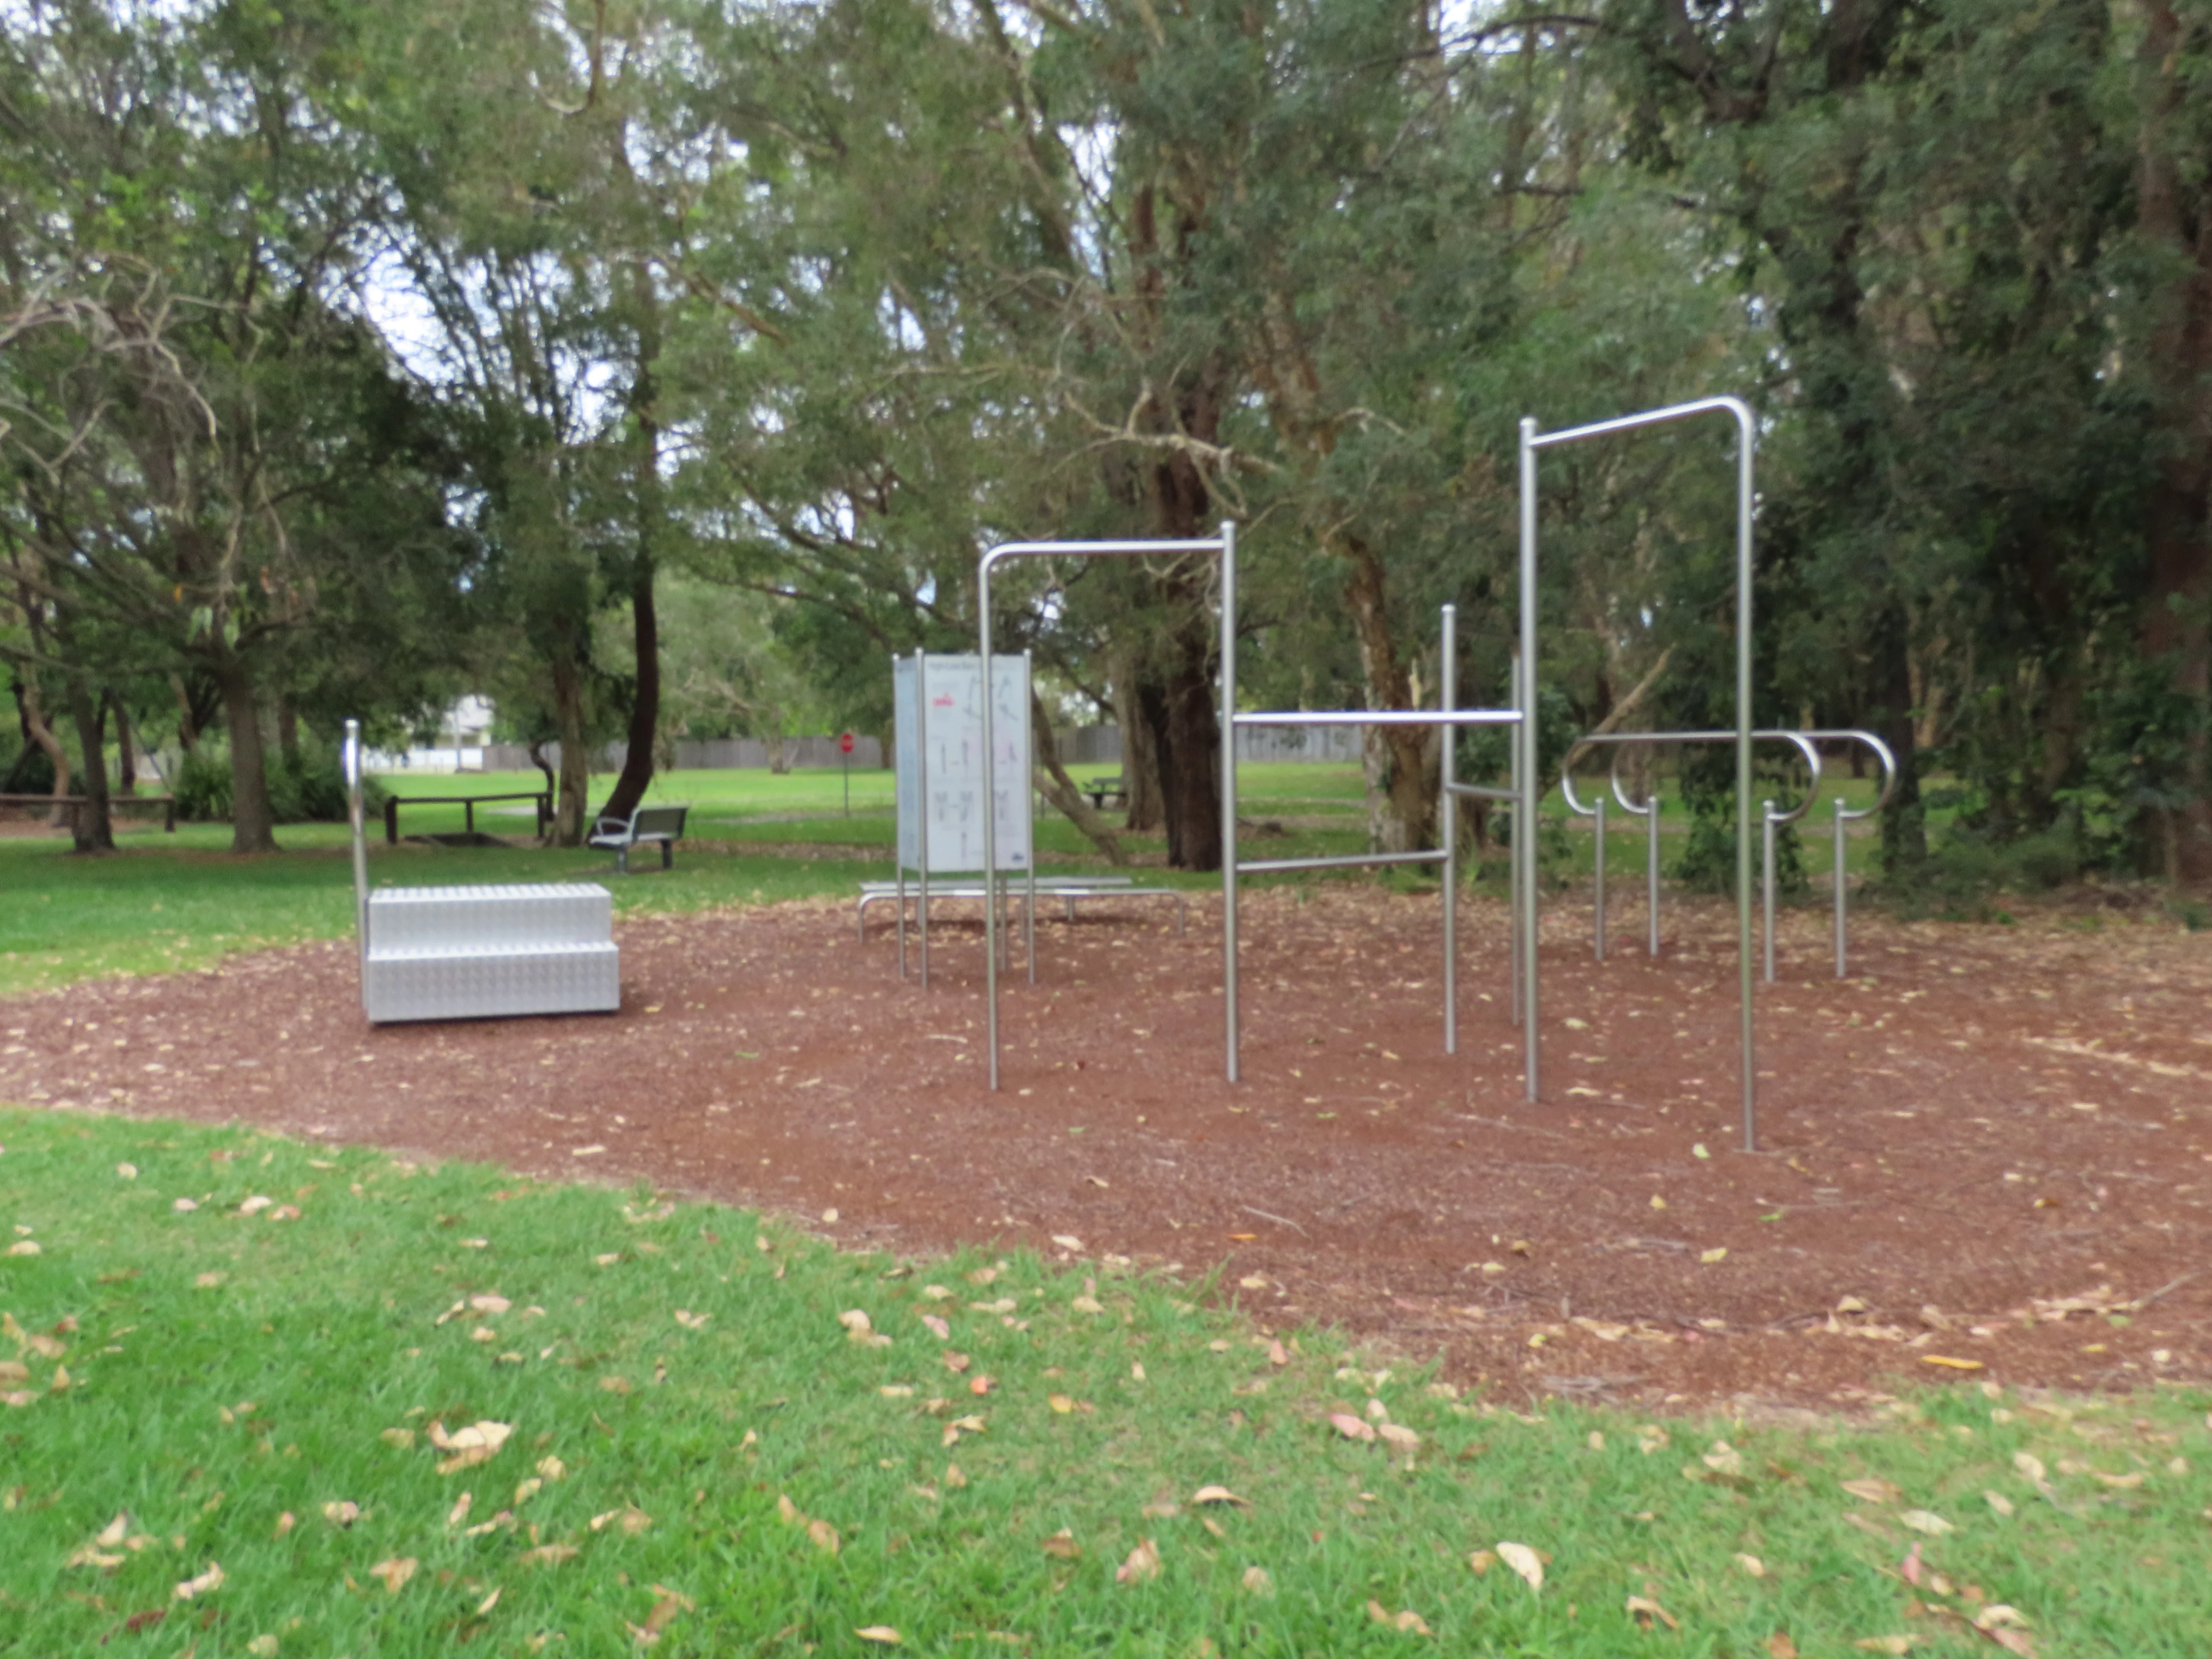 Exercise Park and Equipment at Little Mountain Common Park